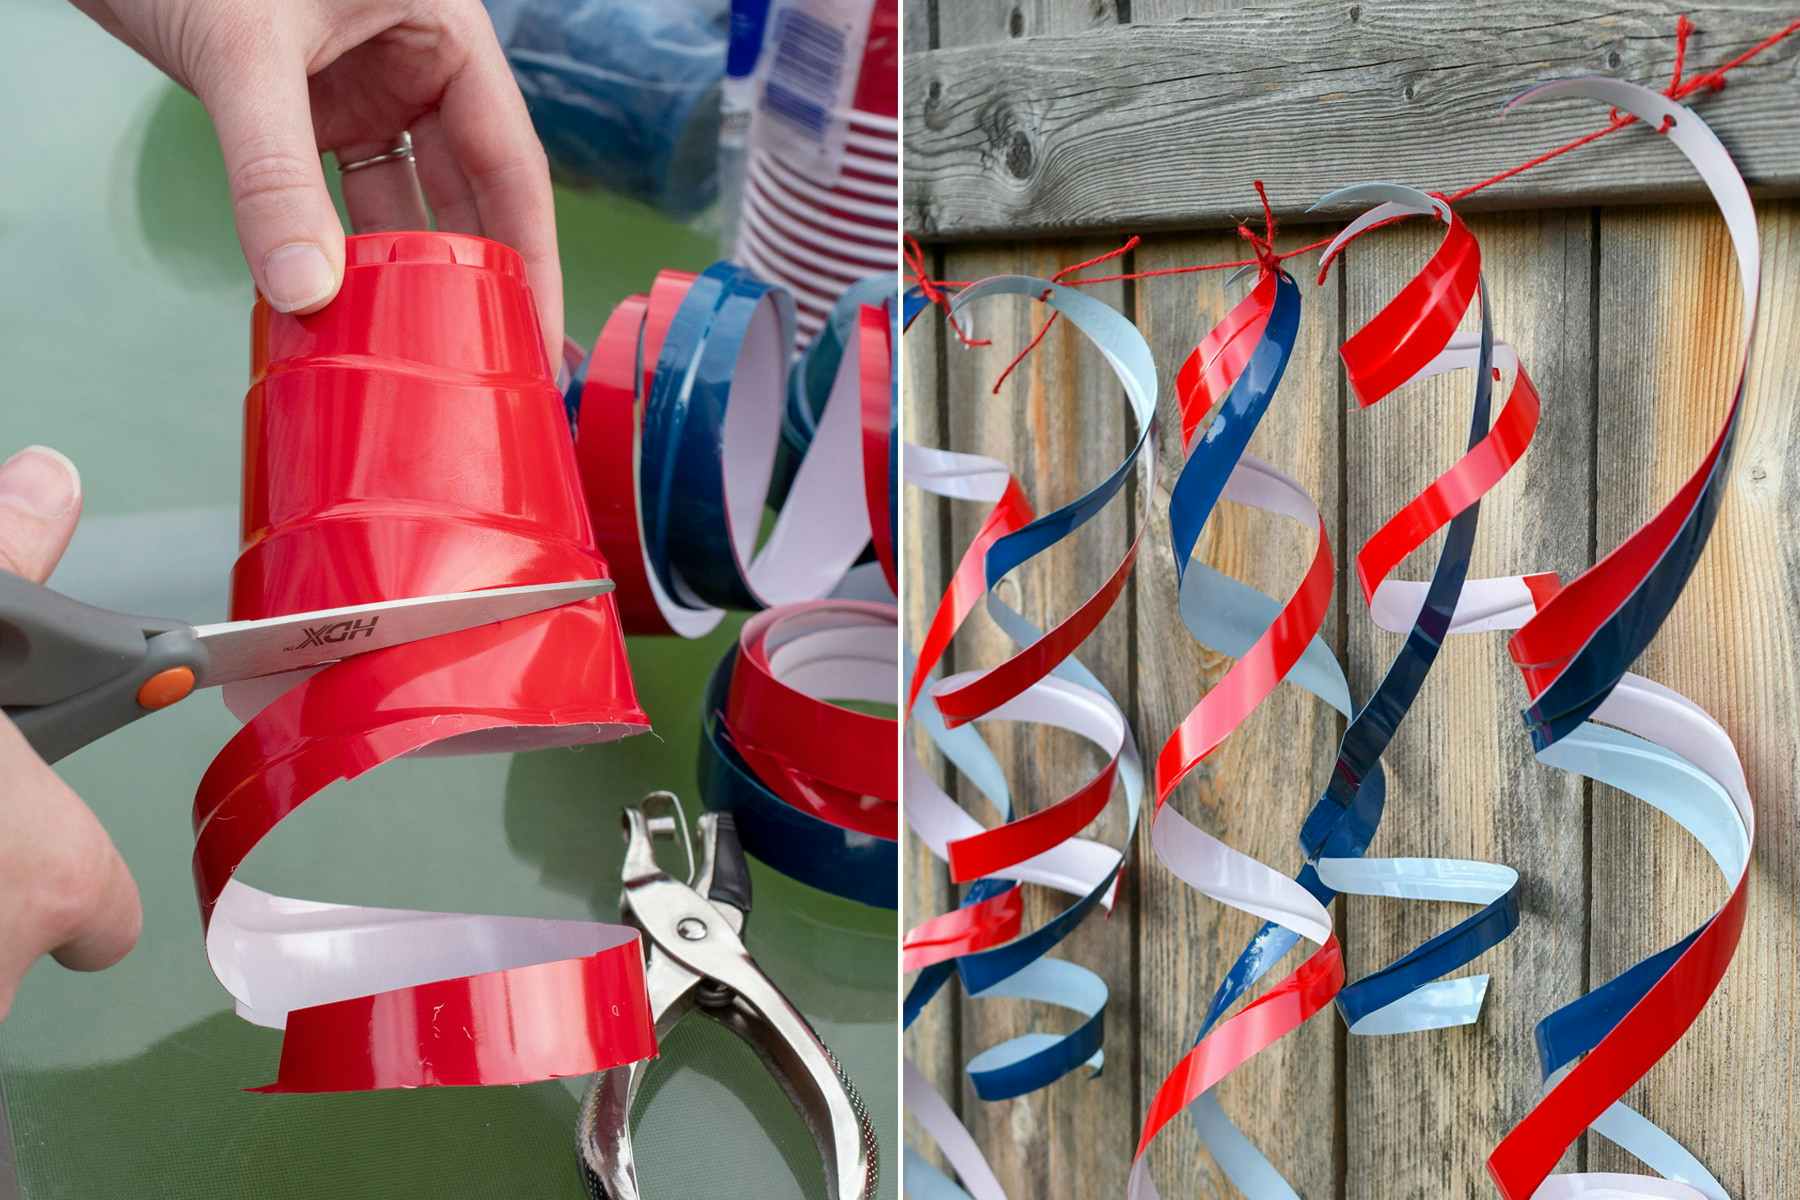 A person using scissors to cut red and blue plastic cups into squiggly streamers, and a banner of red and blue cup streamers hanging on a fence.